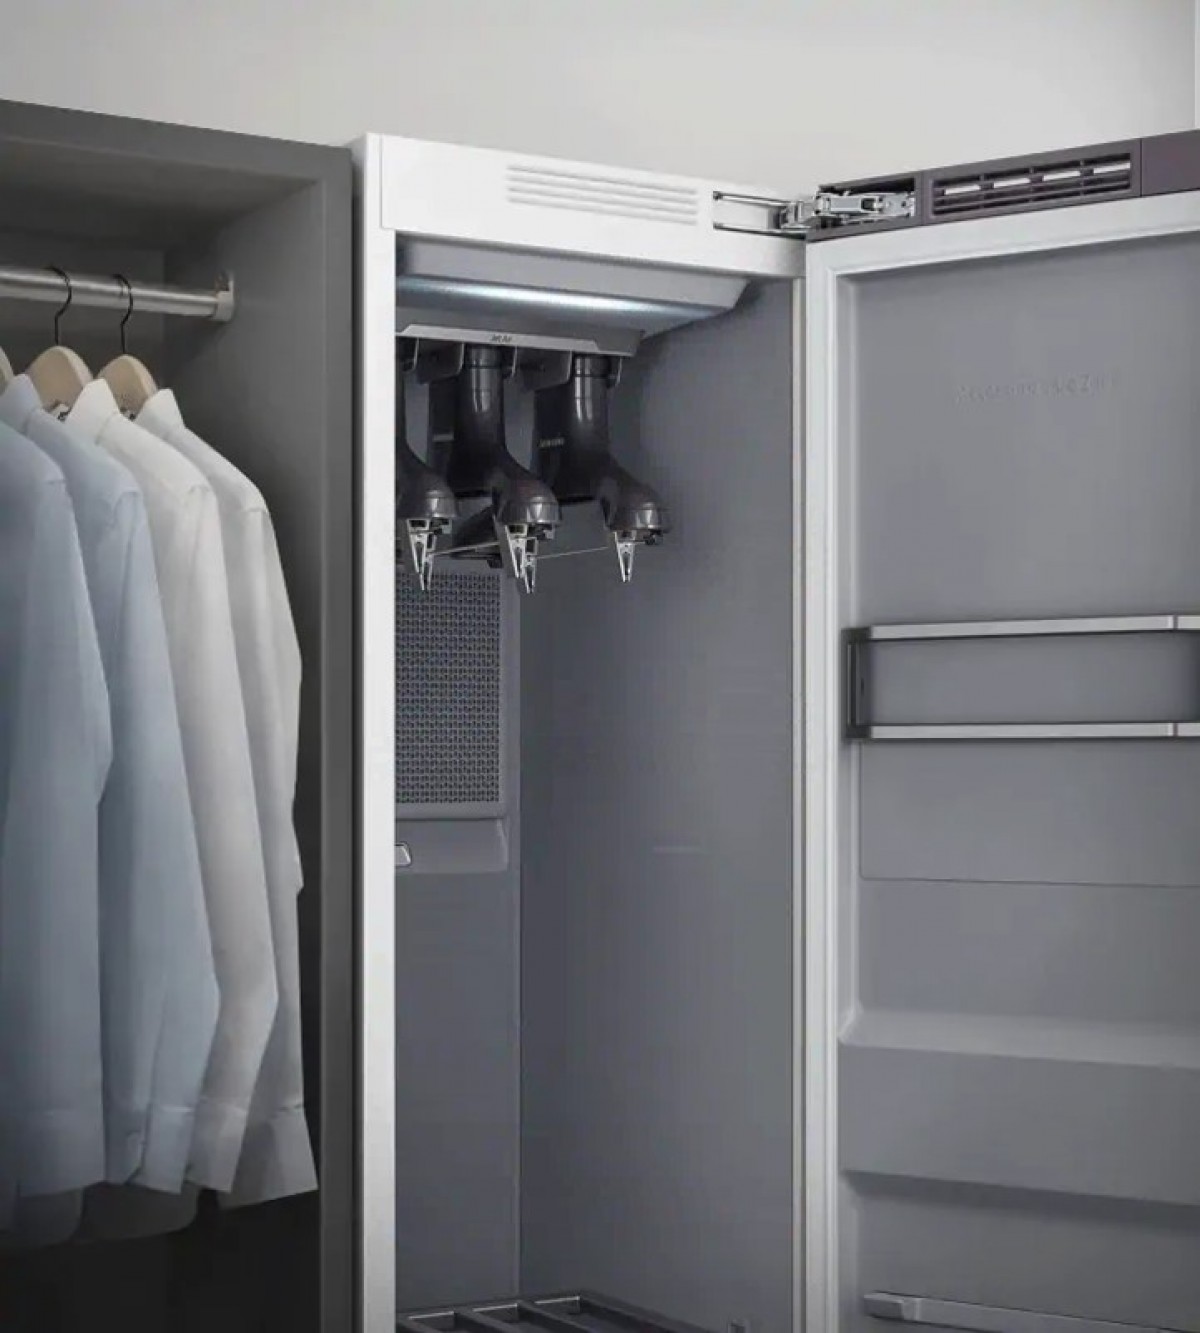 The Life of a Closet and What is the Future of Wardrobes? - image 5